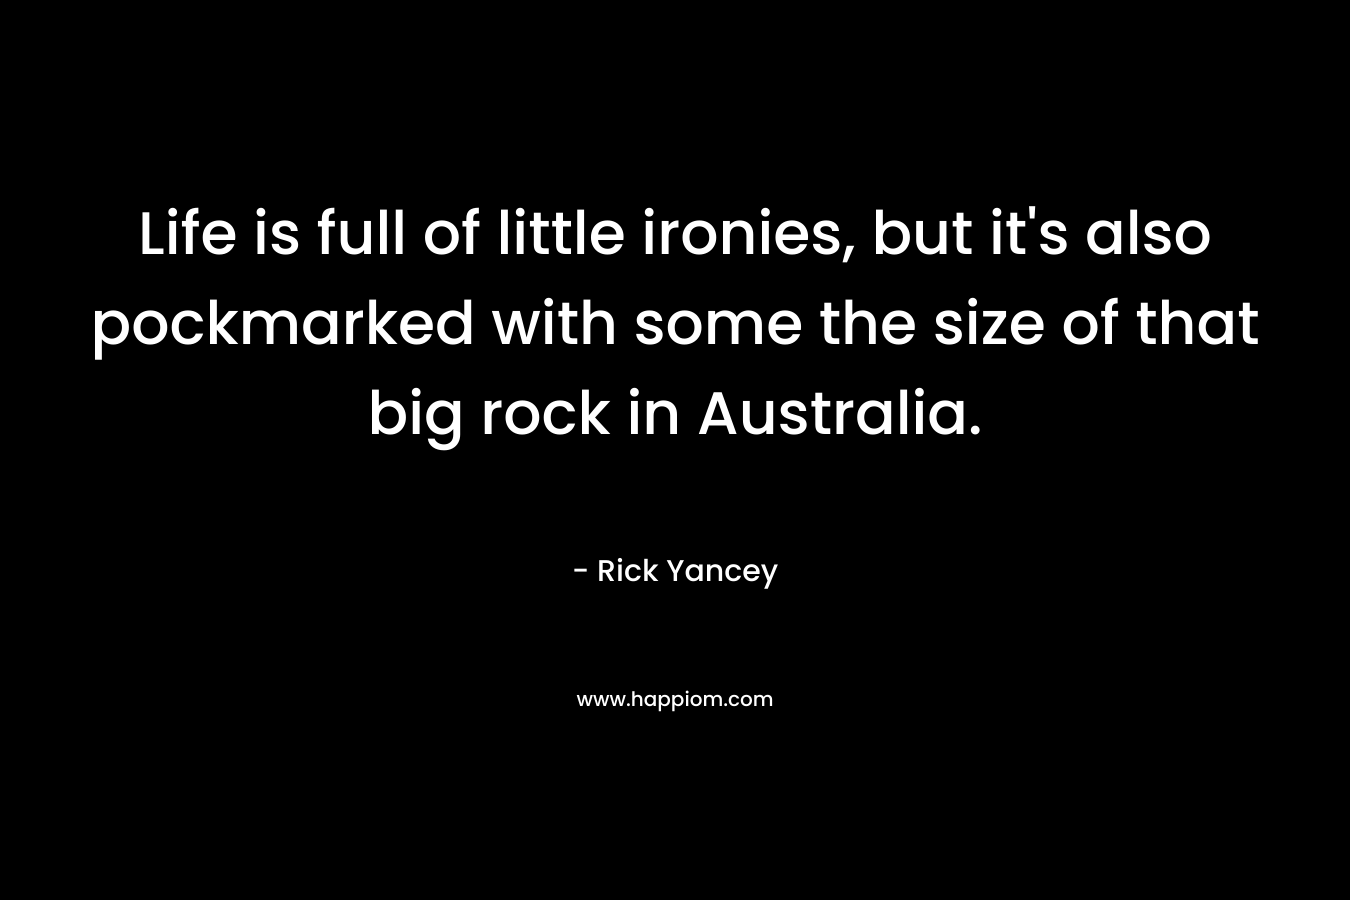 Life is full of little ironies, but it's also pockmarked with some the size of that big rock in Australia.